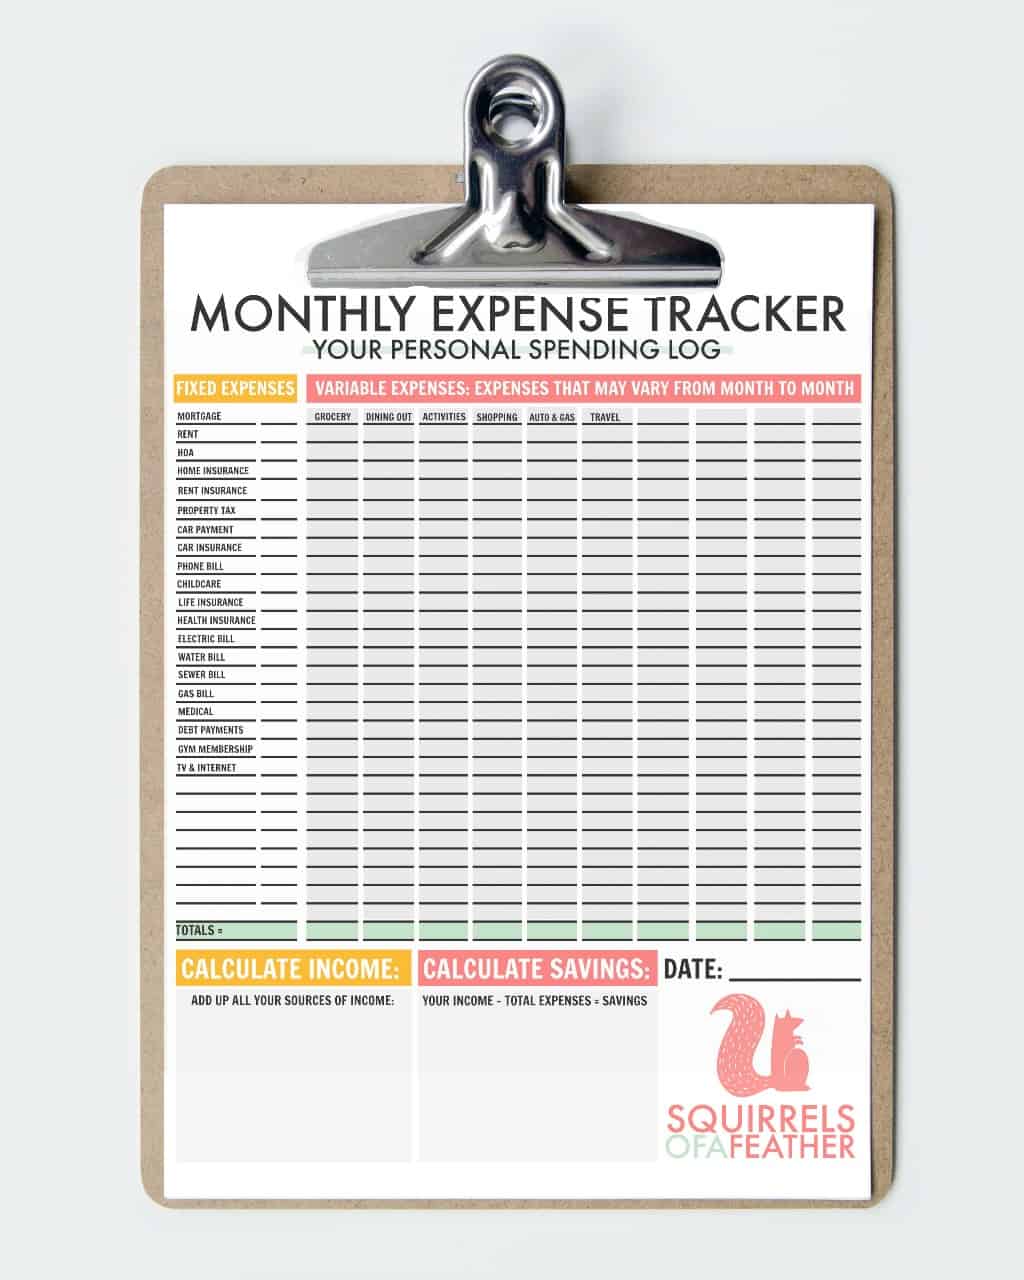 paper-paper-party-supplies-budget-printable-income-tracker-printable